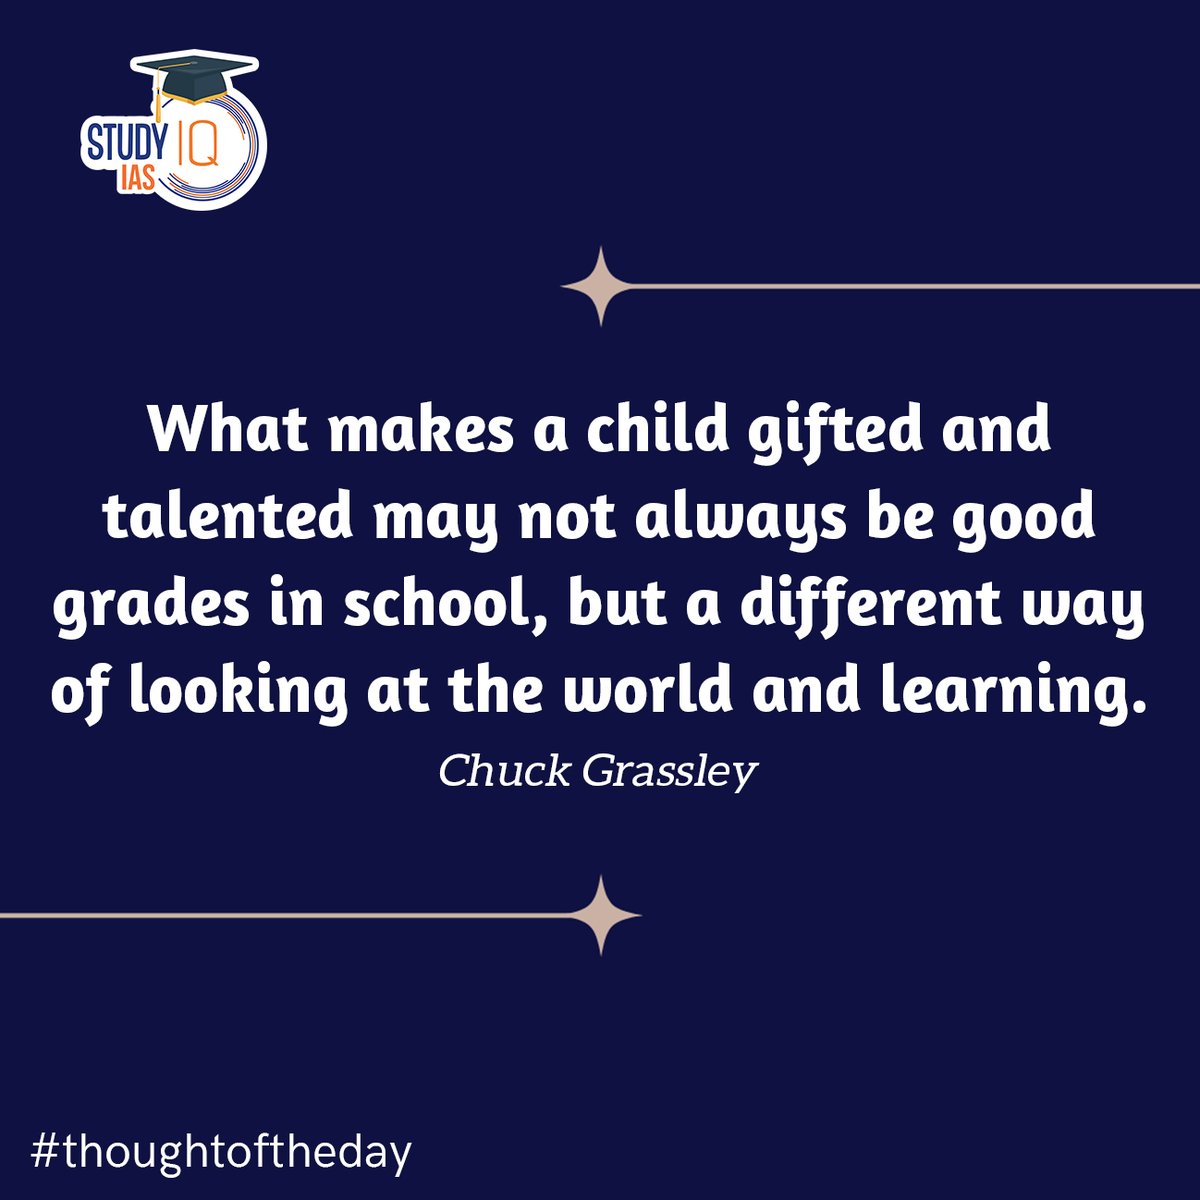 #childgifted #goodgrades #school #learning #chuckgrassley #thoughtoftheday #Motivationalquote #dailymotivation #quotes #quoteoftheday #todaythought #quotesaboutlife #quoteofthelife #dailyquotes #dailythoughts #motivationquotes